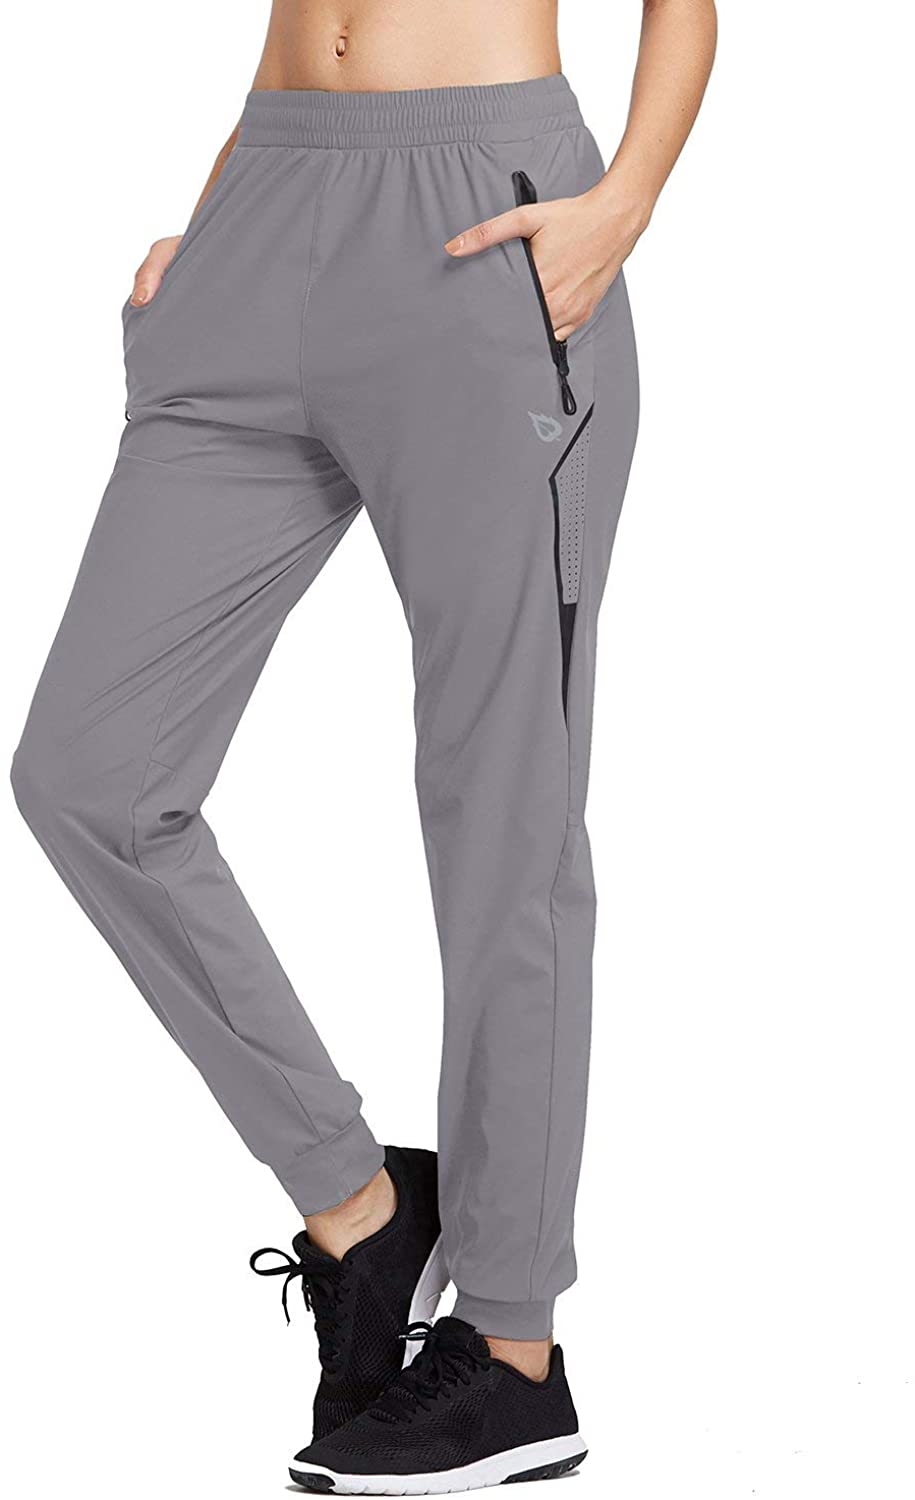  BALEAF Women's Running Pants with Pockets Quick Dry Joggers  Lightweight Athletic Workout Pants Light Grey S : Clothing, Shoes & Jewelry